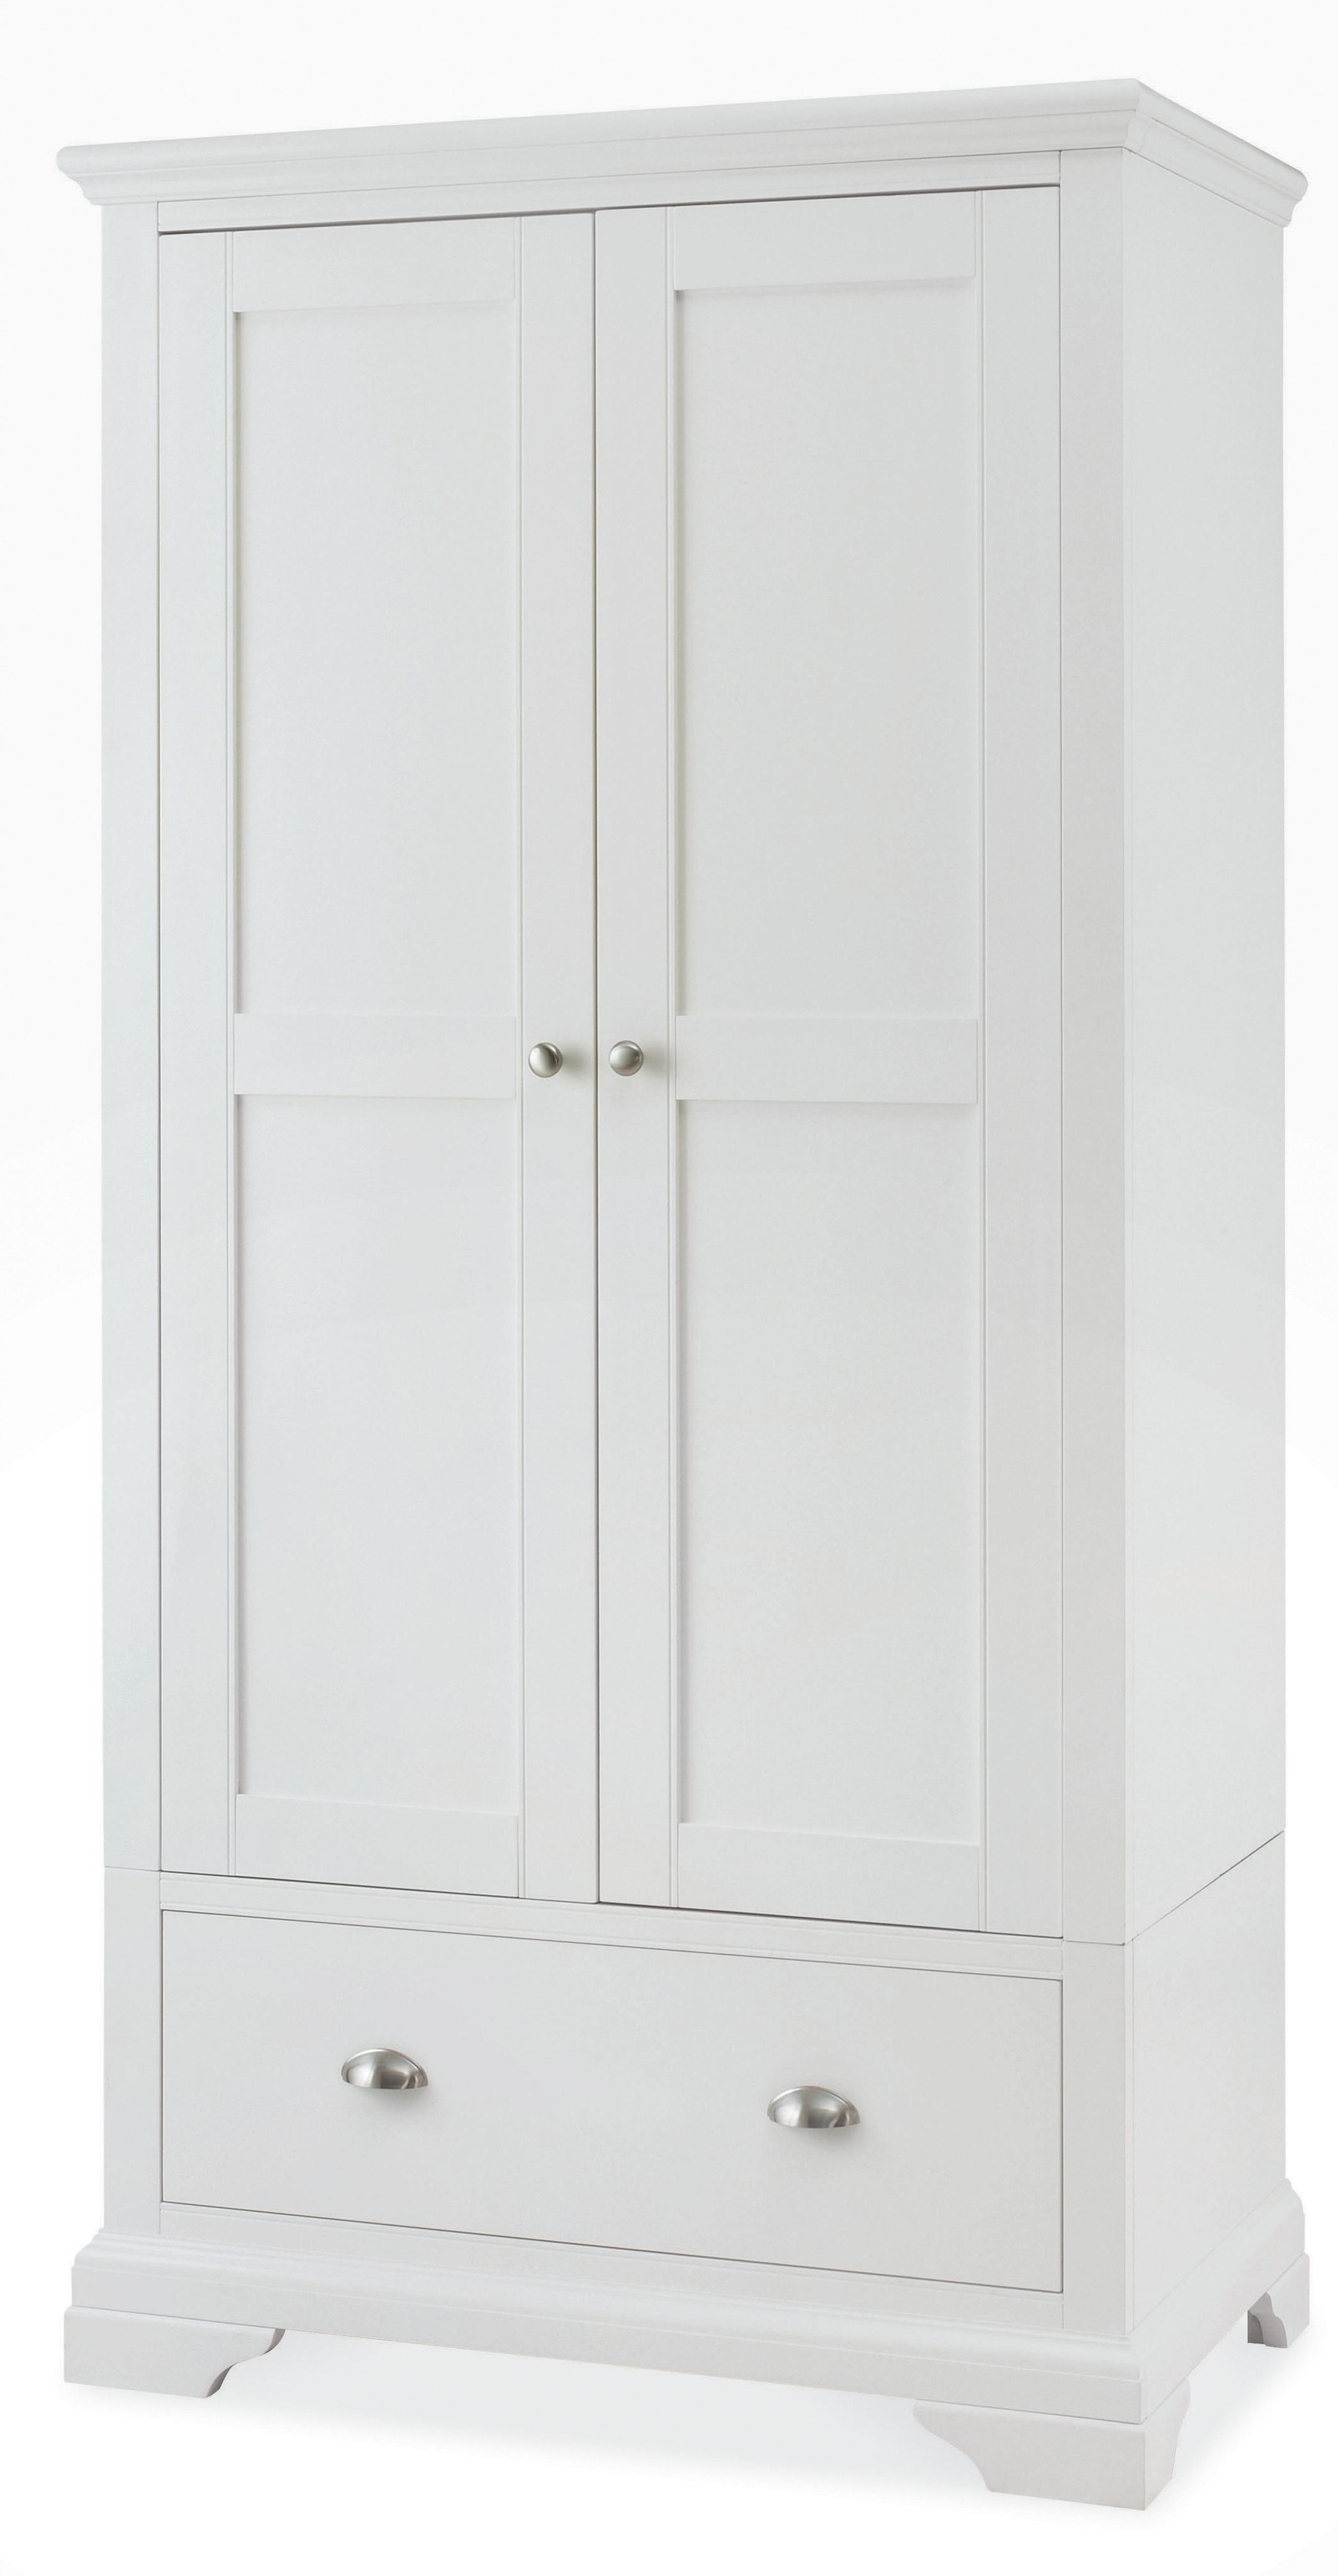 2017 White 3 Door Wardrobe With Drawers Sliding Uk Children's Childs Pertaining To White 2 Door Wardrobes With Drawers (View 14 of 15)